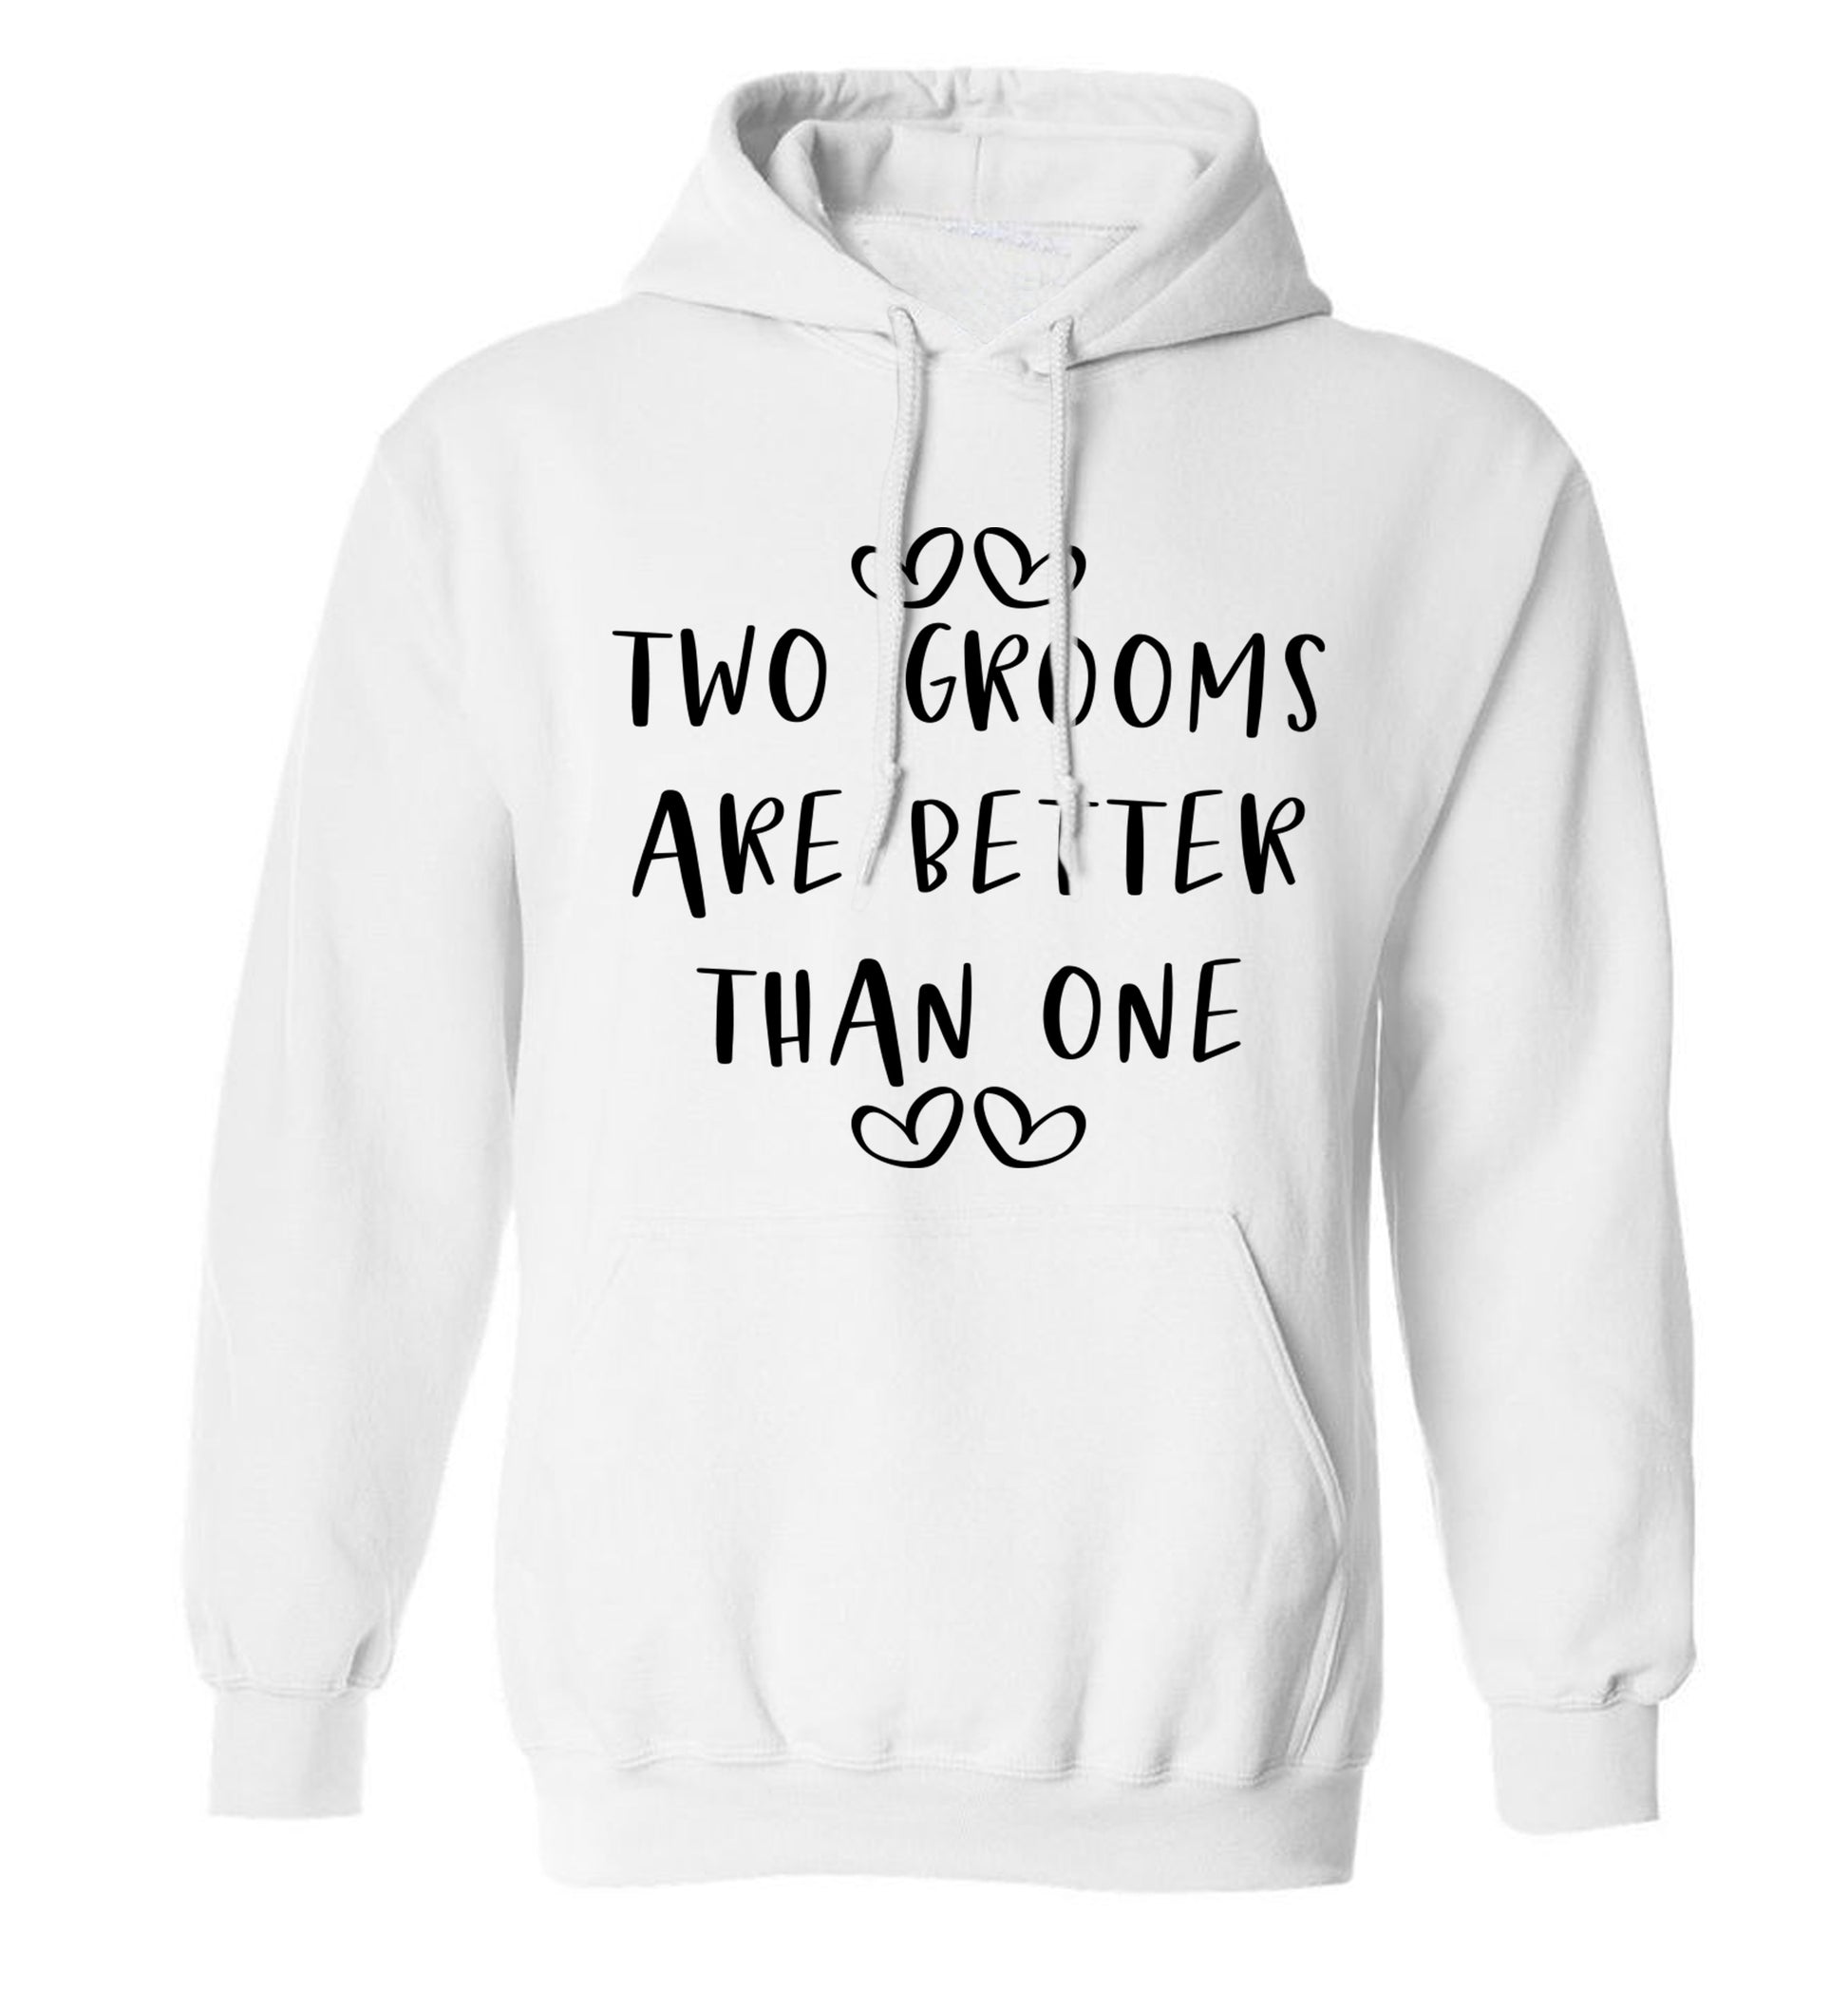 Two grooms are better than one adults unisex white hoodie 2XL